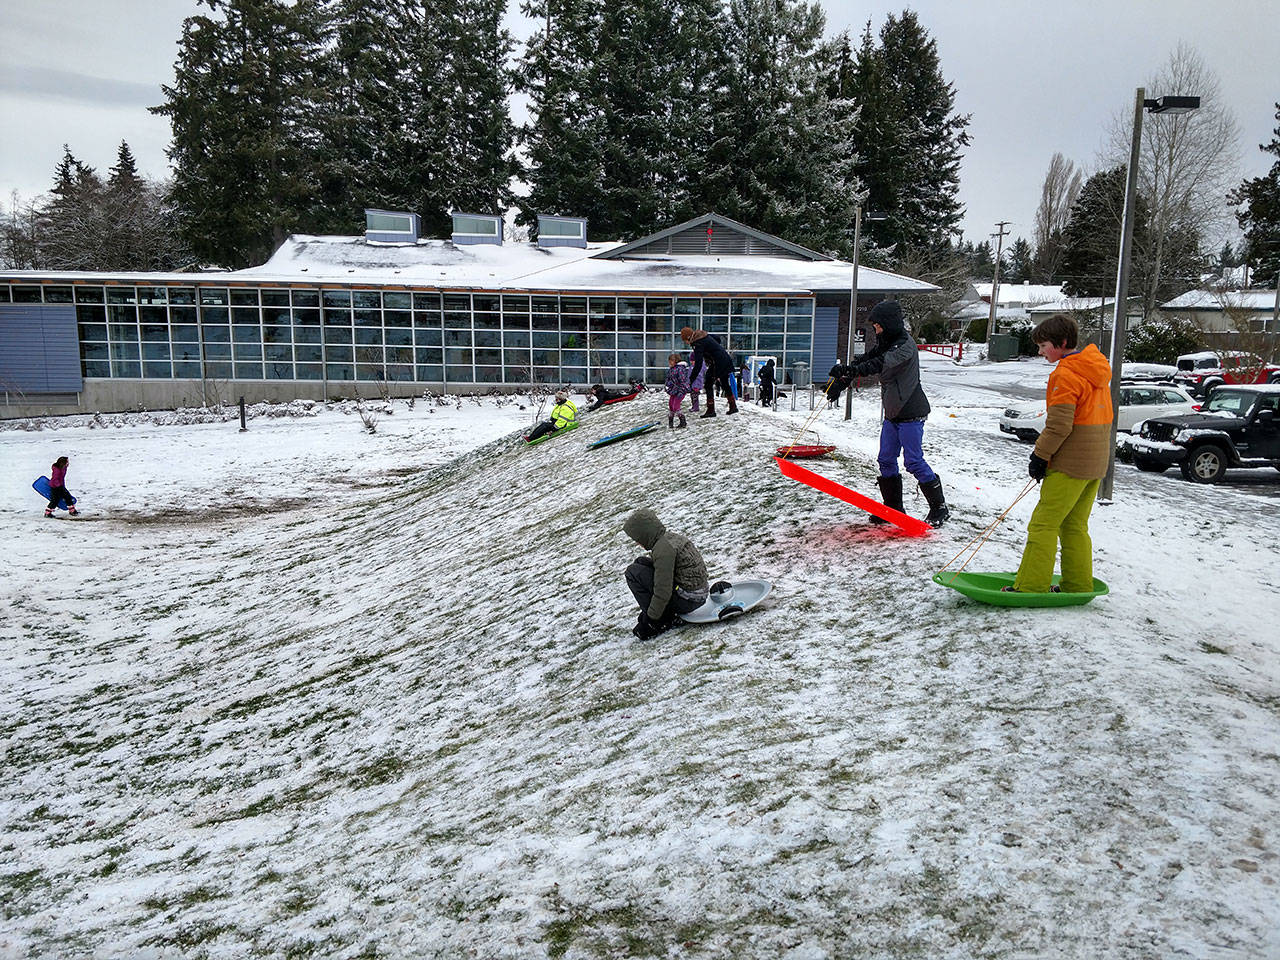 Vashon snow day at the library. (Susan Riemer/Staff Photo)